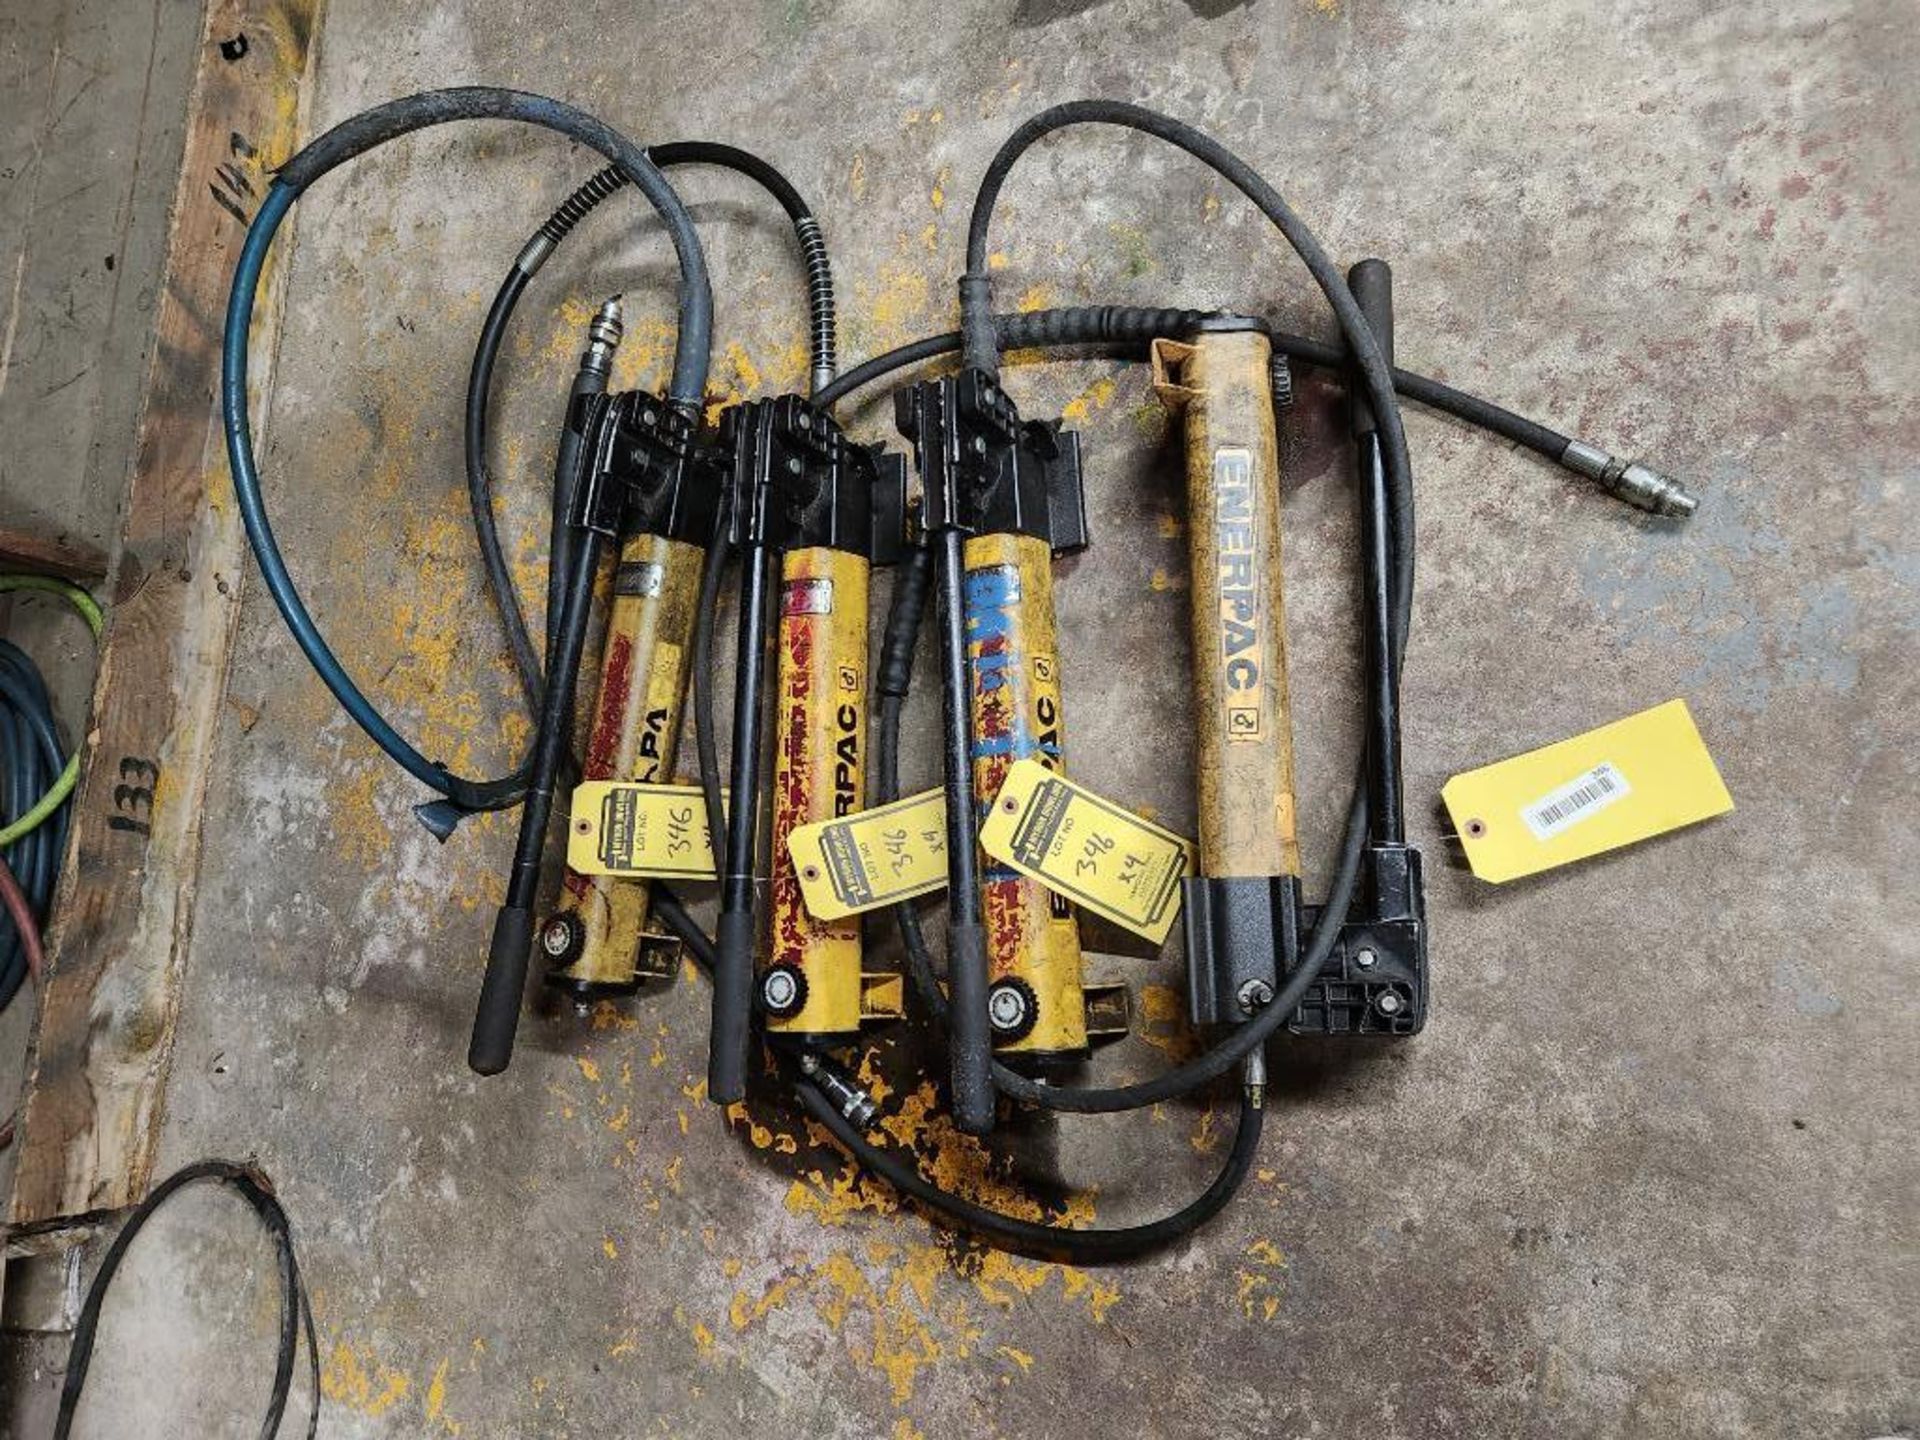 (4) Enerpac Hydraulic Hand Pumps, 10,000PSI